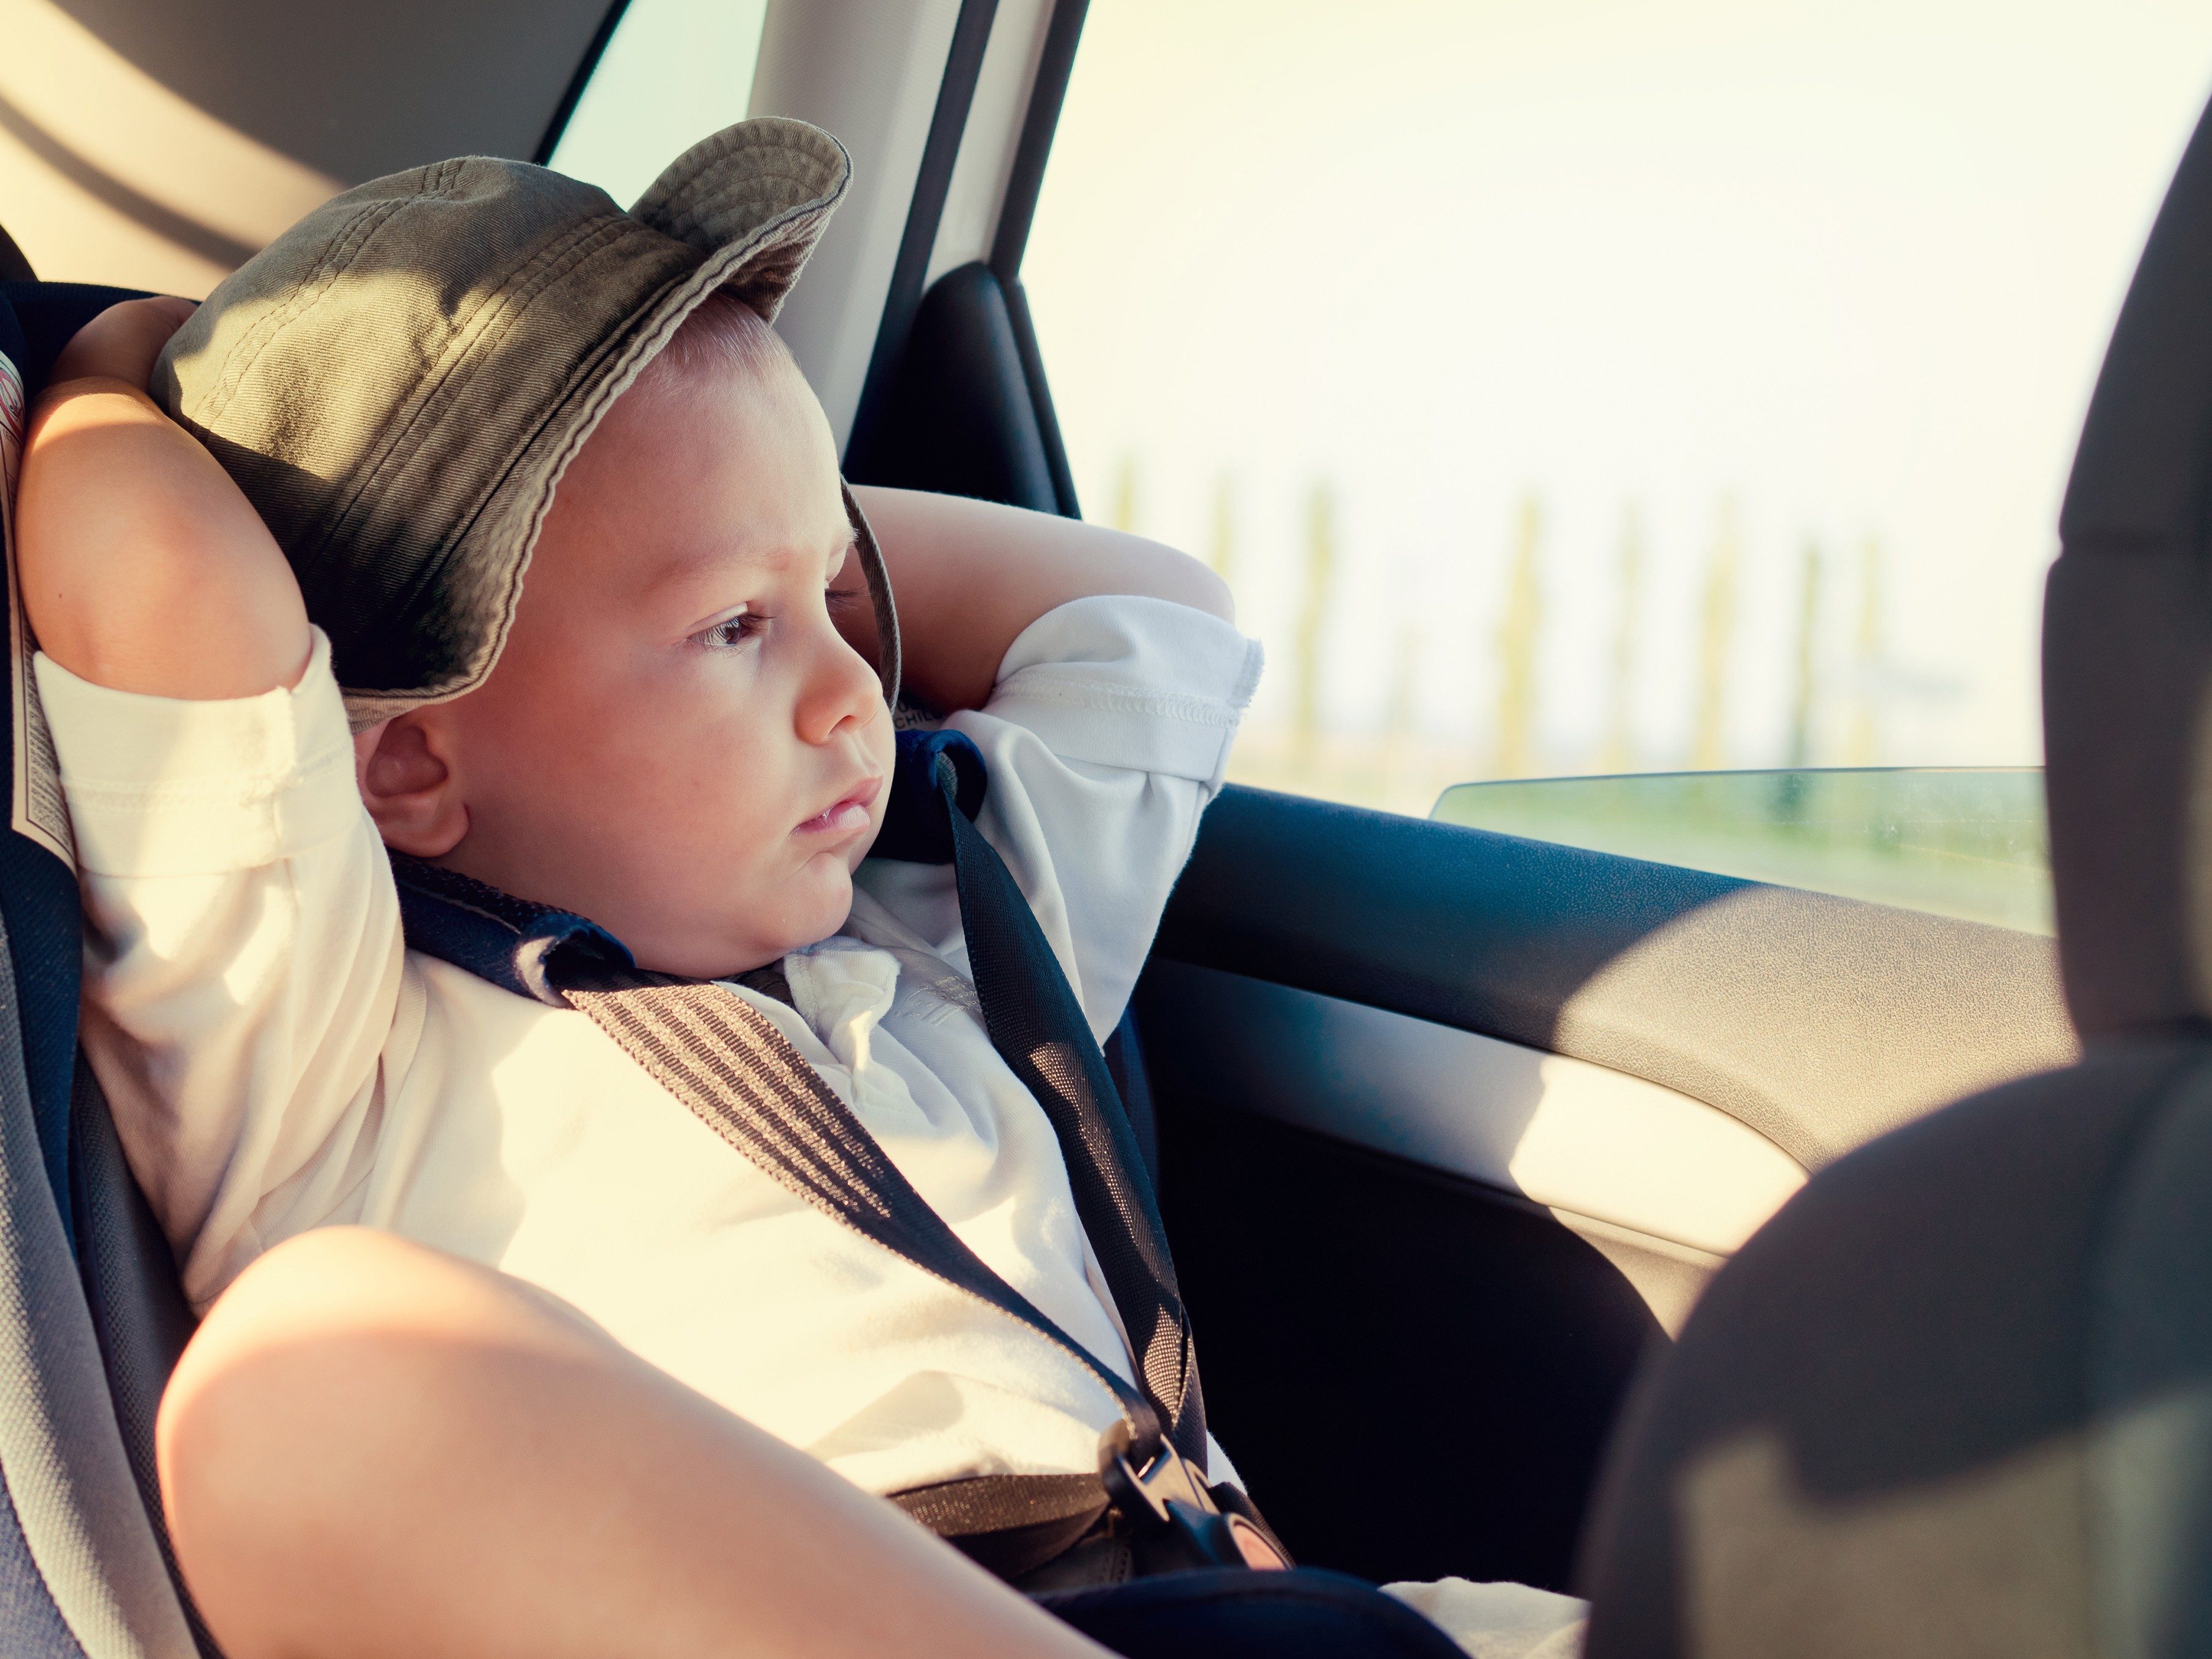 Driving tip #9: Get the kids settled before you leave.